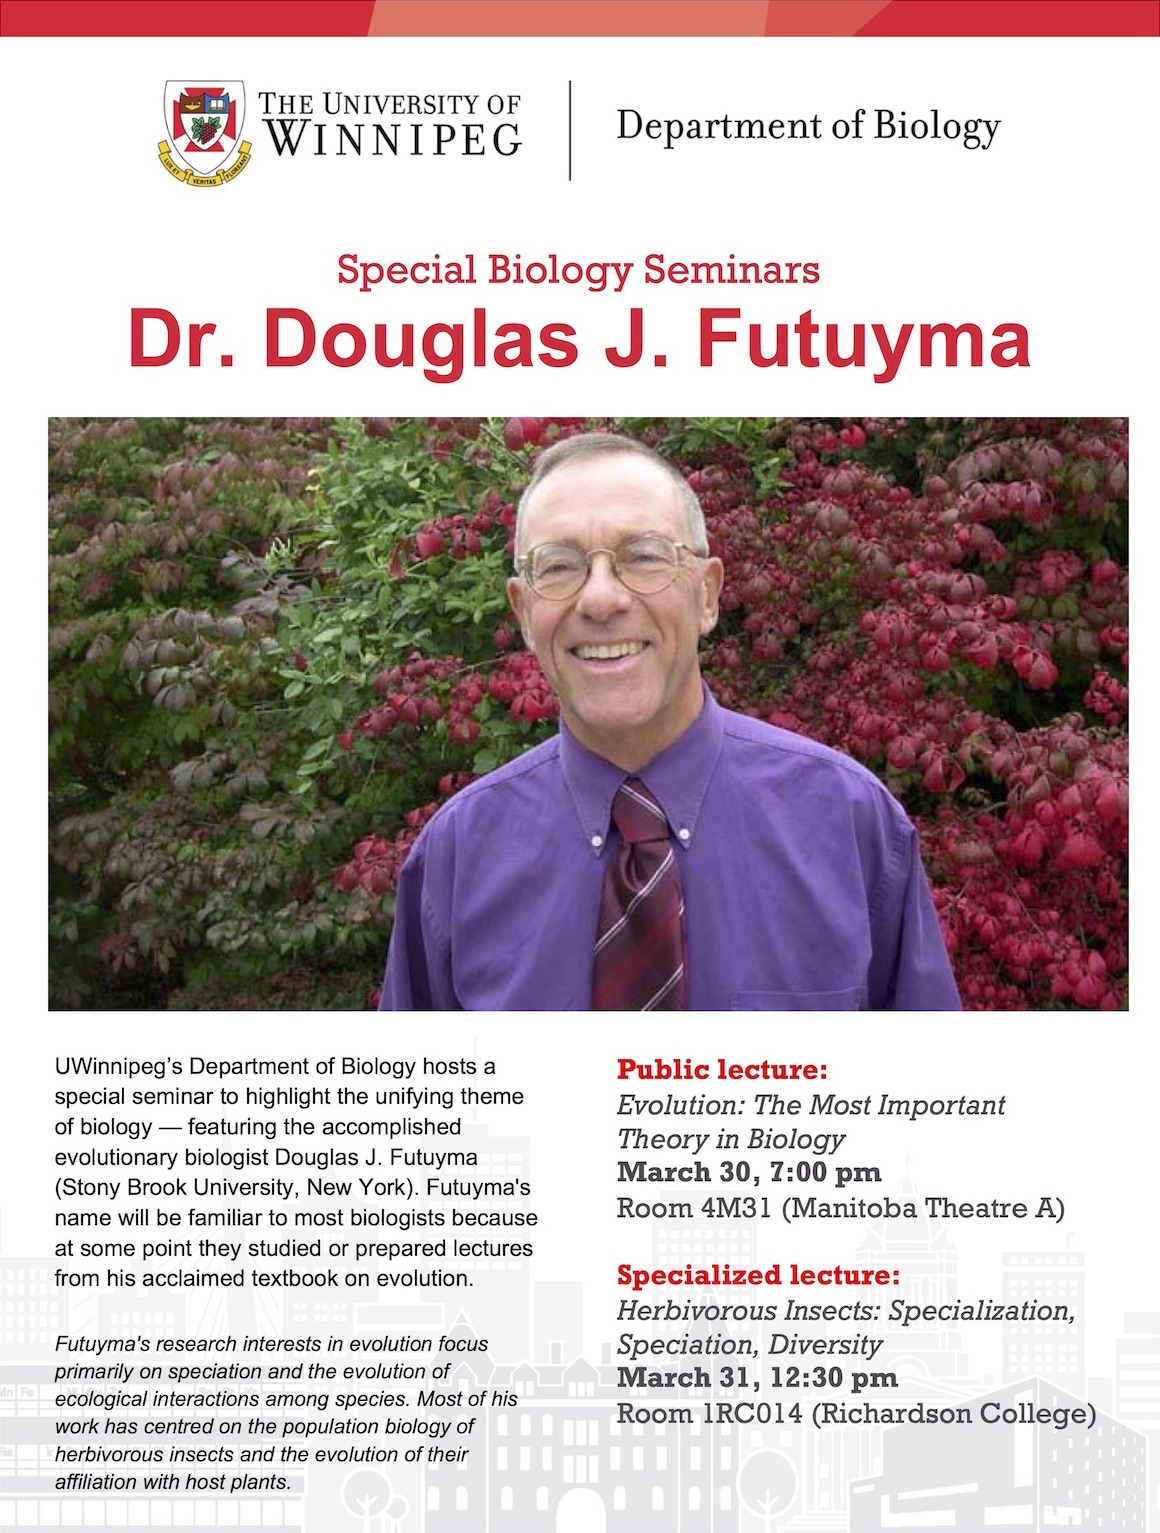 The Department of Biology hosts a special seminar to highlight the unifying theme of biology by inviting an accomplished evolutionary biologist. This year, the eminent evolutionary biologist, Douglas J. Futuyma (Stony Brook University, New York) kindly accepted our invitation. Futuyma's name should be familiar to most biologists because at some point they studied or prepared lectures from his acclaimed textbook on evolution. 